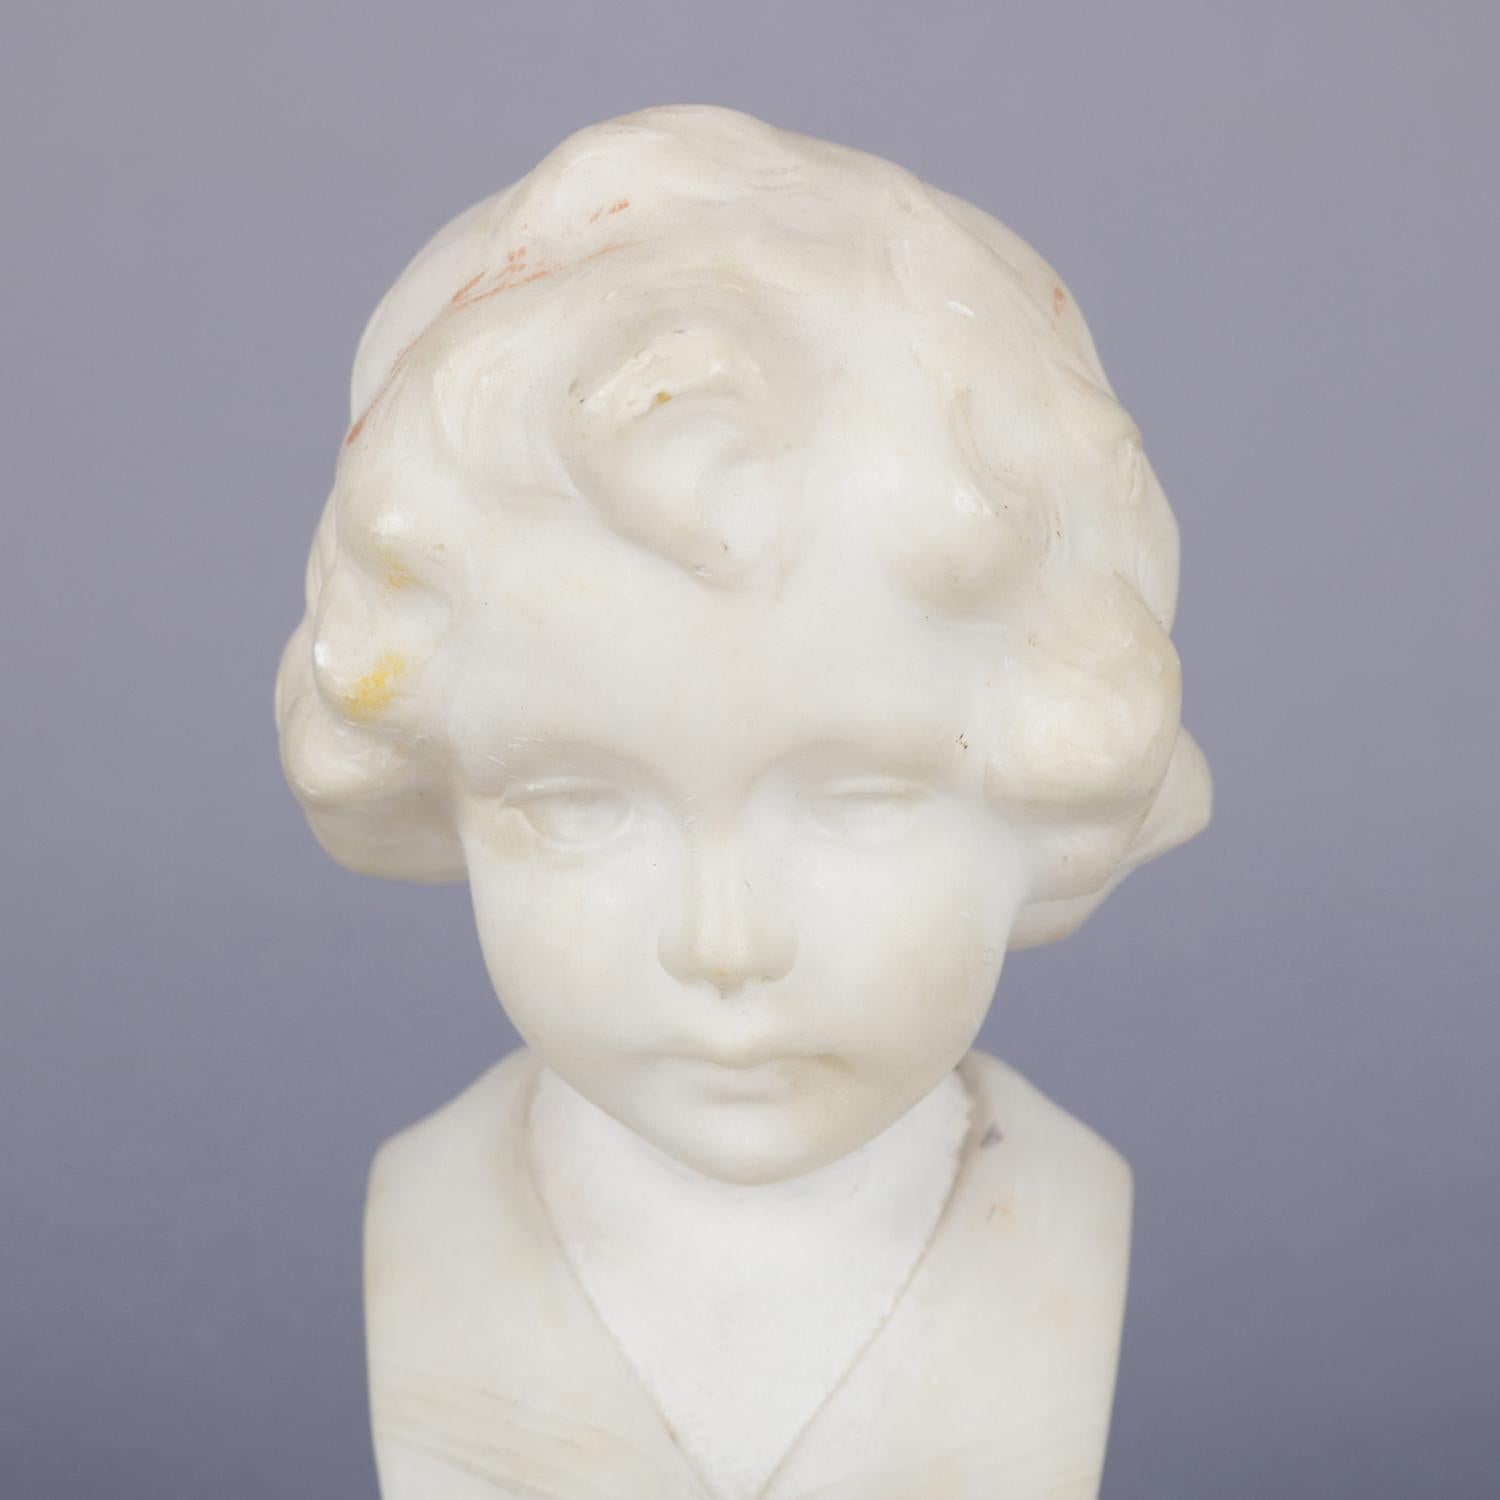 Hand-carved alabaster portrait sculpture of young boy, en verso signed Greiwer, seated on marble Stand, c1900


Measures: 7.5